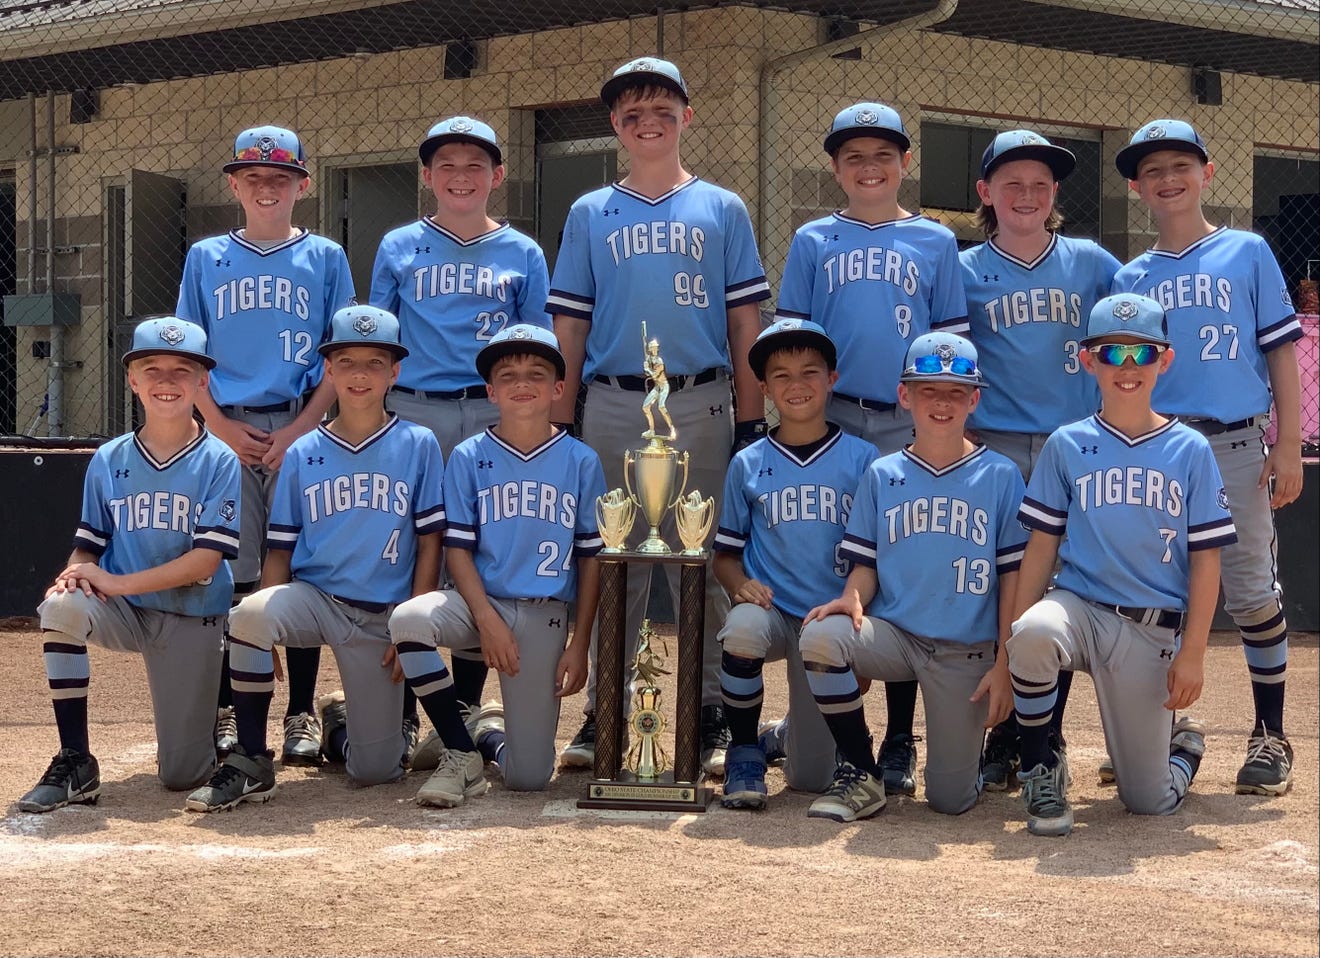 Twinsburg Tigers 10U baseball team has runnerup finish in the Nations